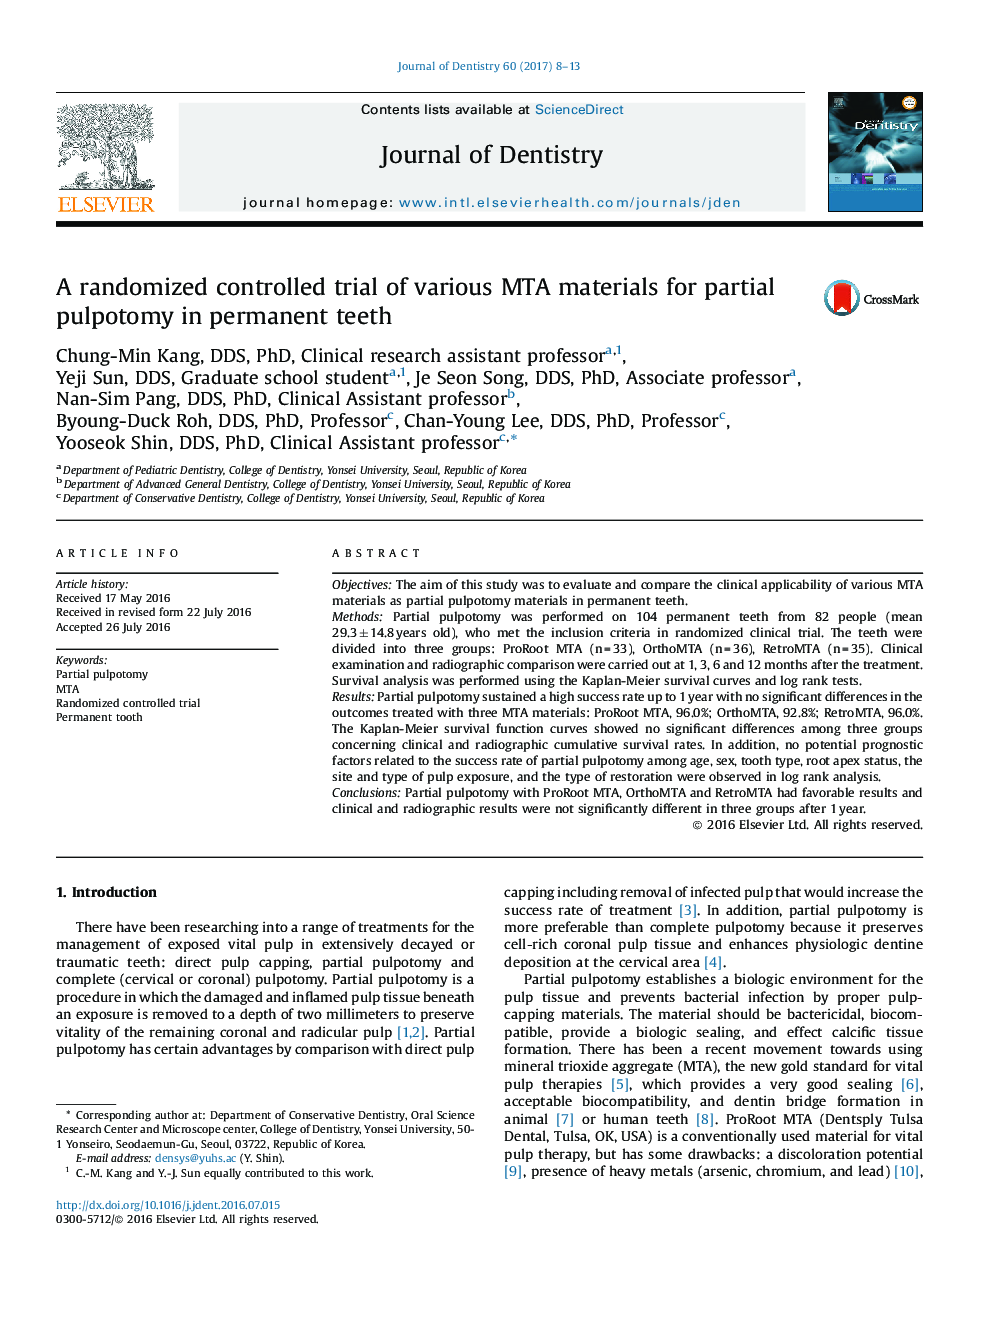 A randomized controlled trial of various MTA materials for partial pulpotomy in permanent teeth